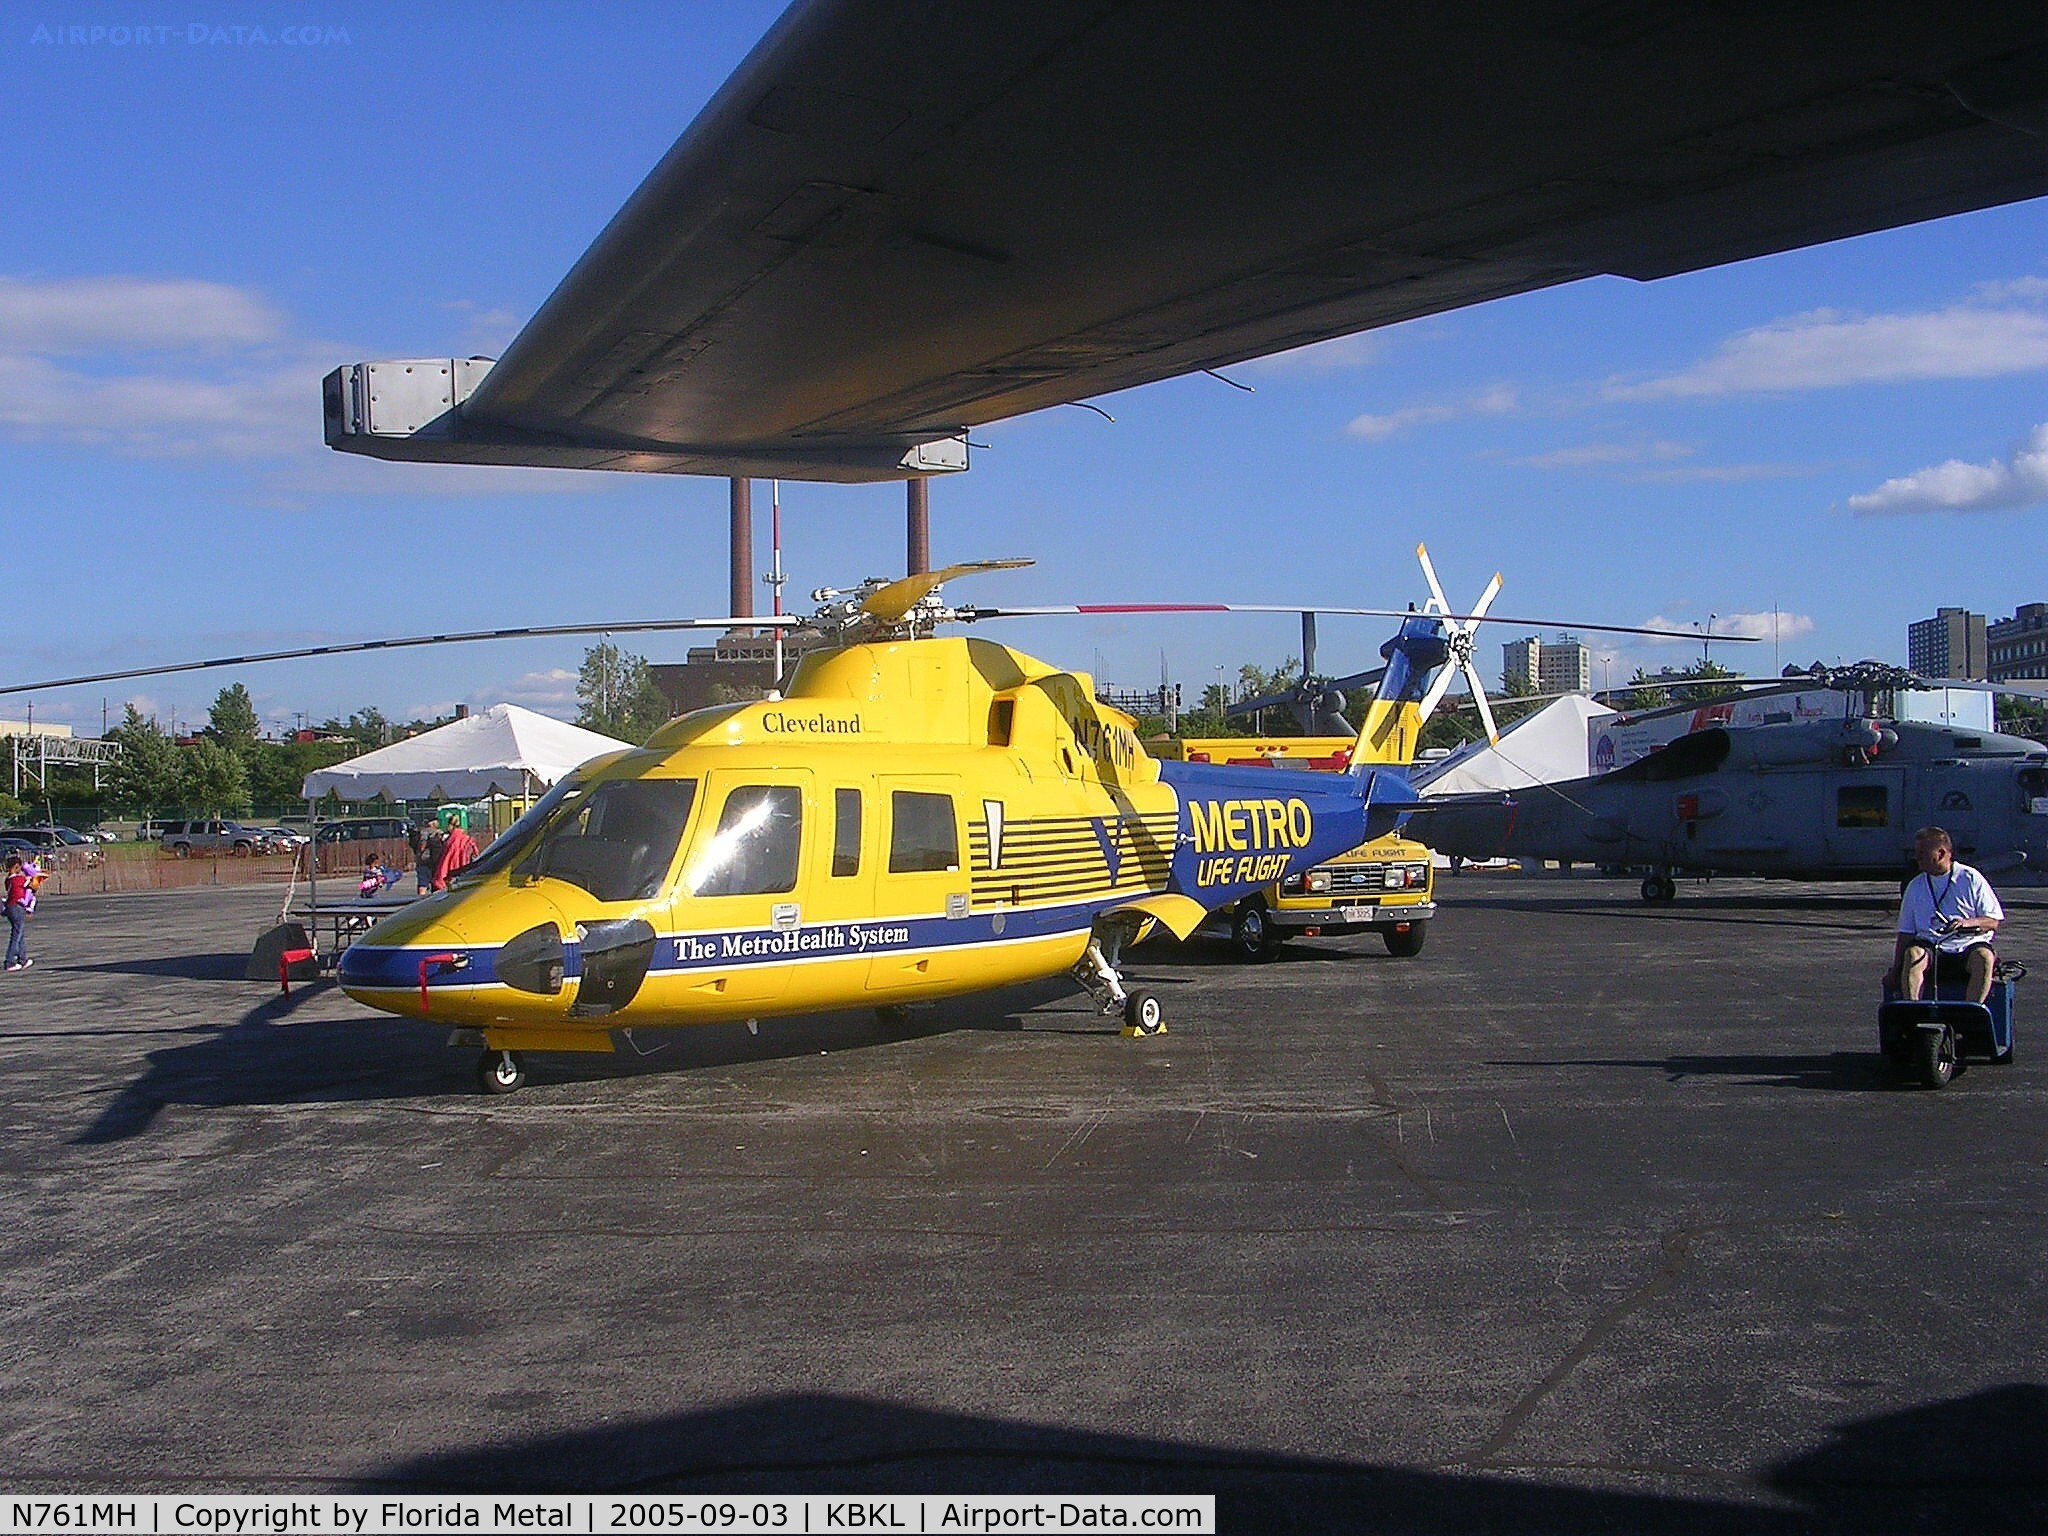 N761MH, 1981 Sikorsky S-76A C/N 760232, Cleveland Airshow 2005